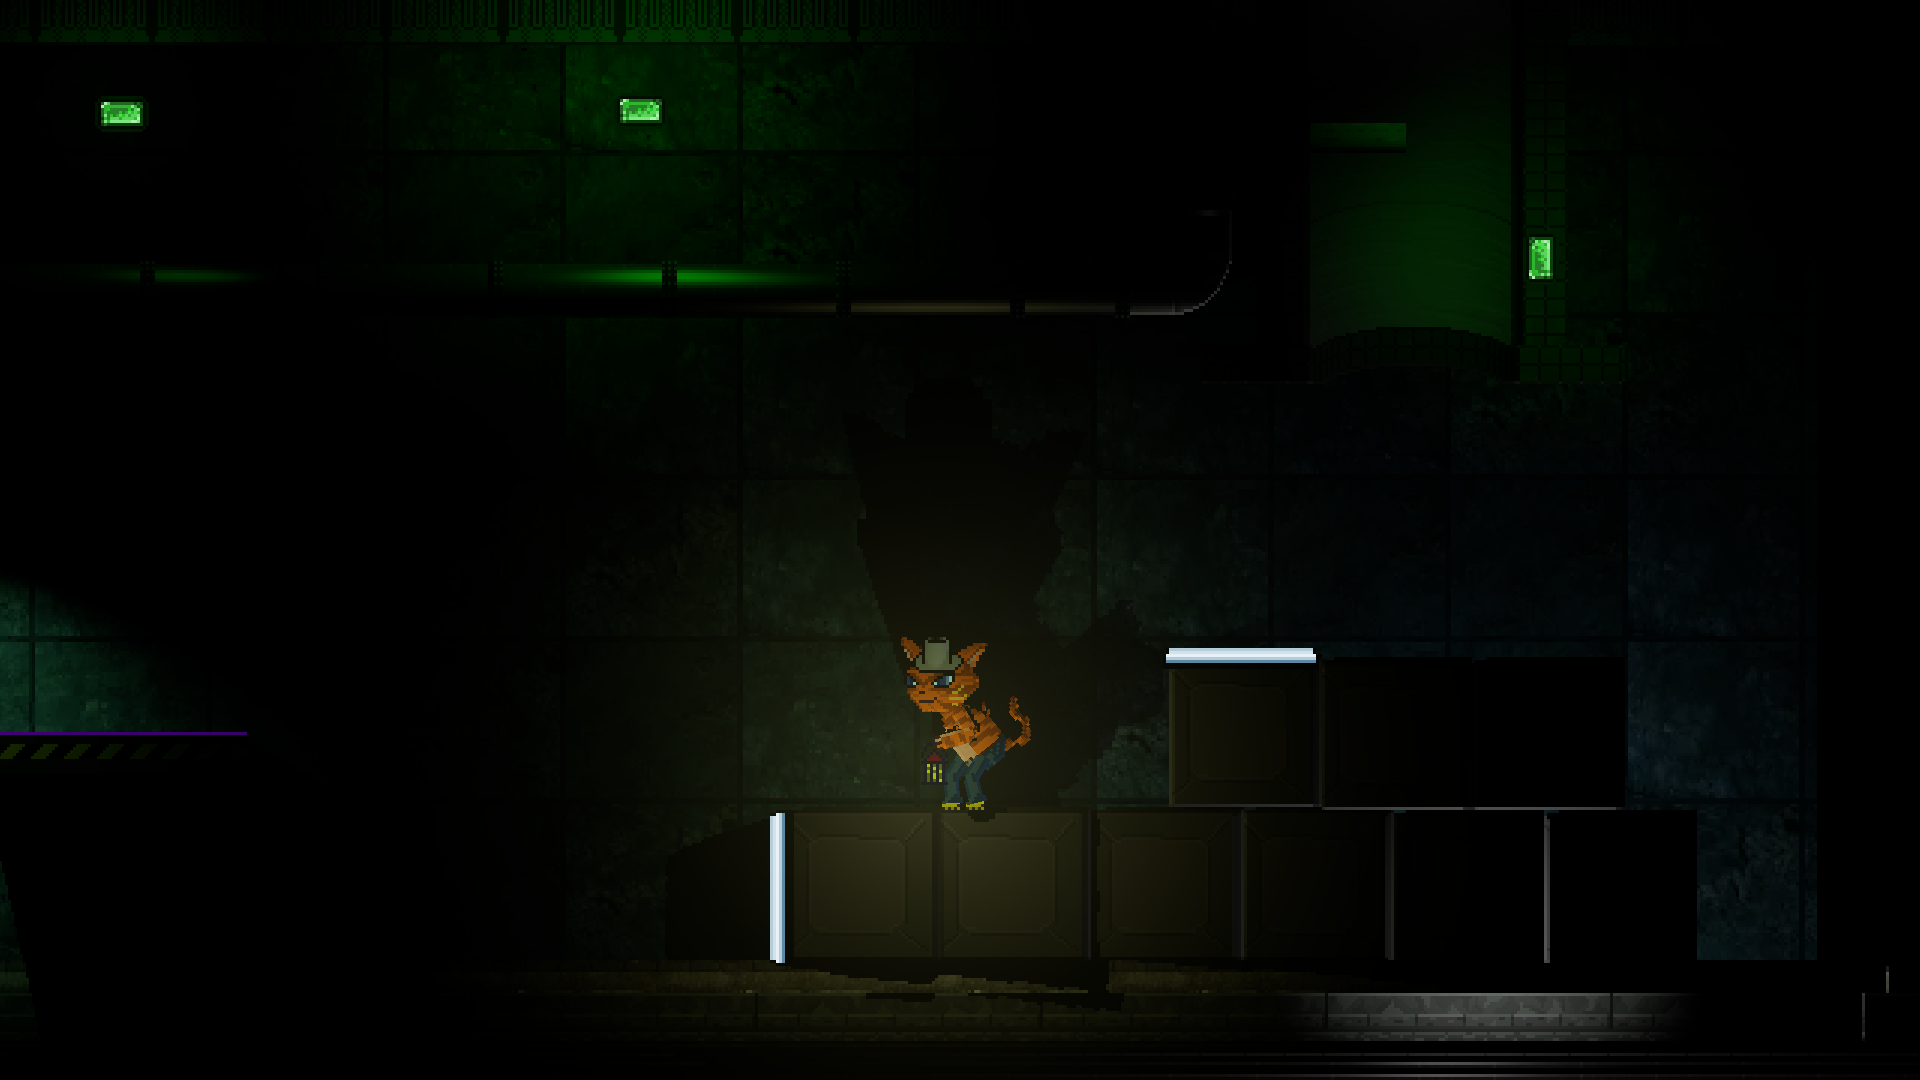 Notice Kiyo's shadow cast by his lantern - as well as the green specular highlight on the metallic pipe